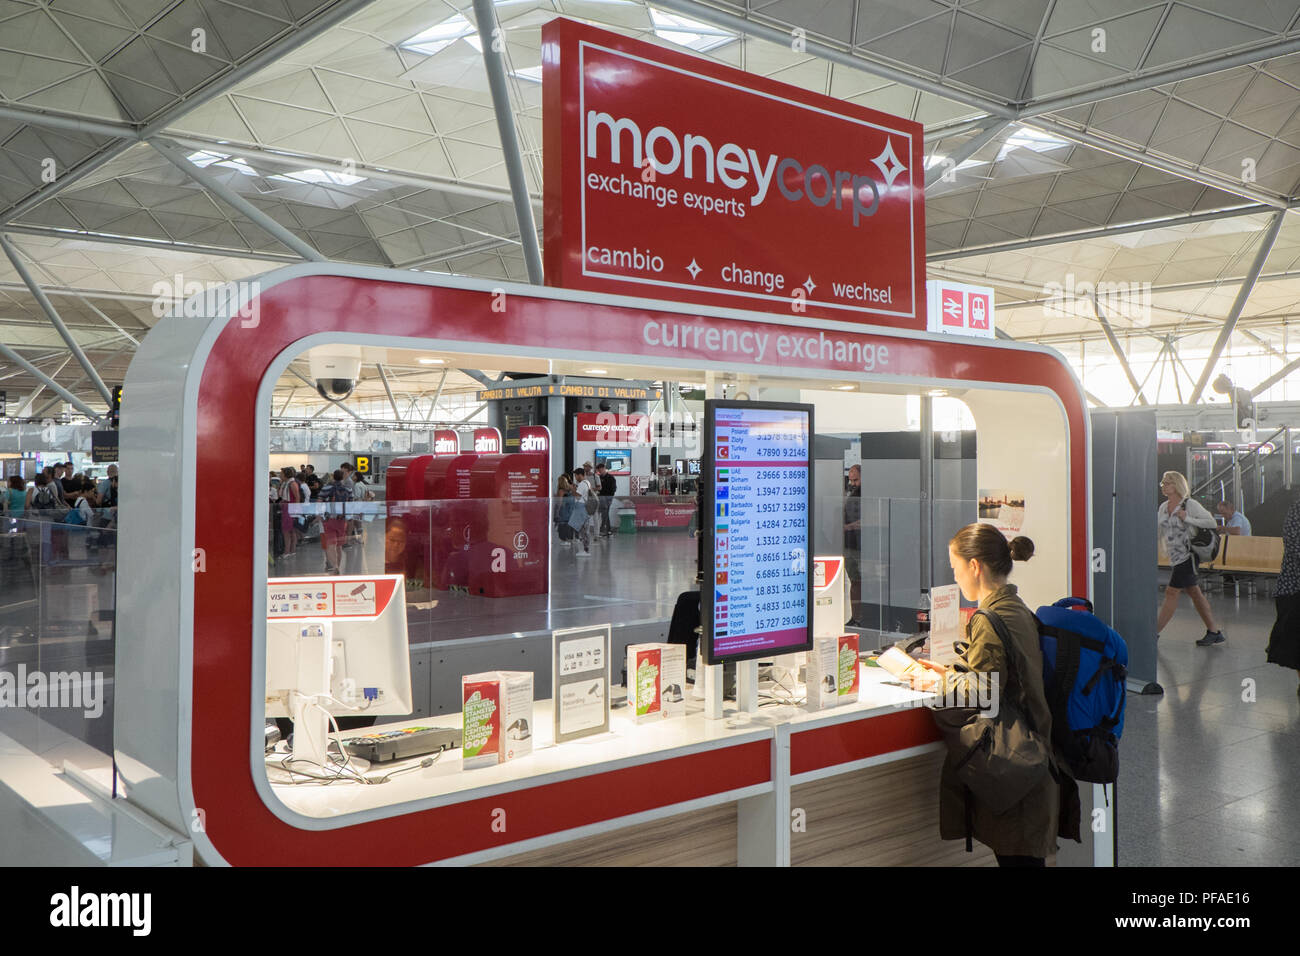 Stansted, Moneycorp,Currency,exchange,kiosk,poor,rates,Airport,arrival,terminal,August,summer,London,Essex,England,Europe,European,passengers,arrival, Stock Photo